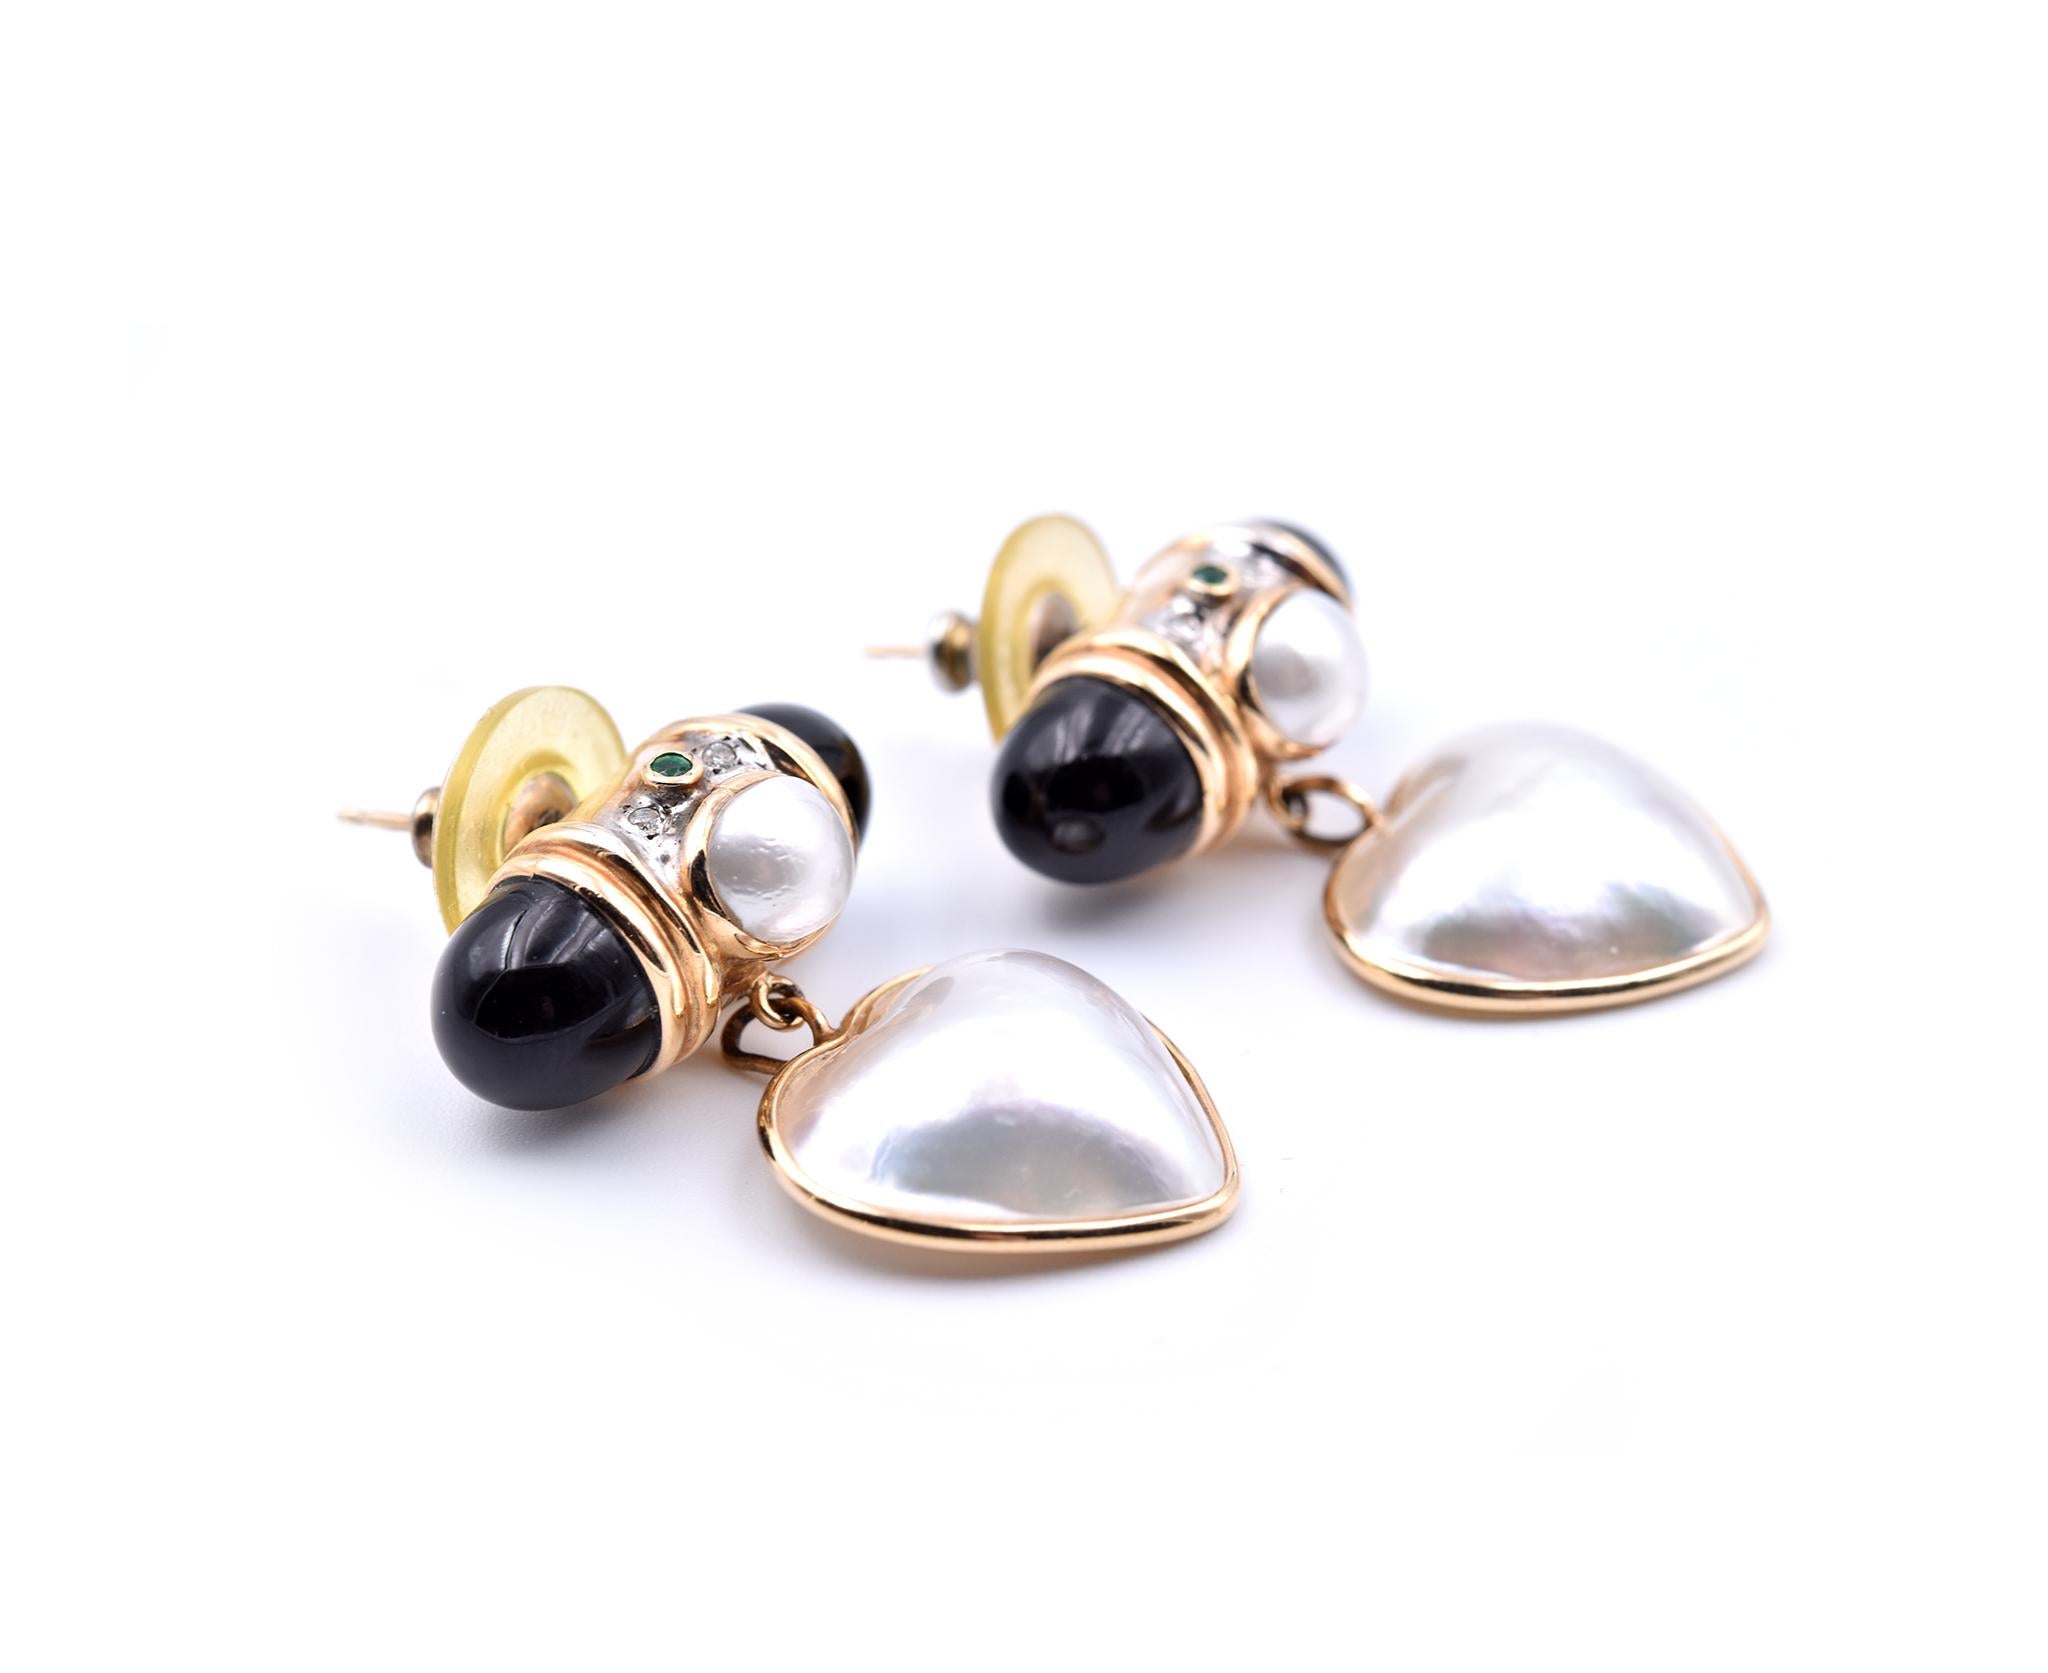 Designer: custom design
Material: 14k yellow gold
Pearls: heart shaped mabe pearls = 15.80mm x 17.05mm
Fastening: post with friction back
Dimensions: Earrings measure approximately 31mm x 23.15mm
Weight: 11.60 grams
